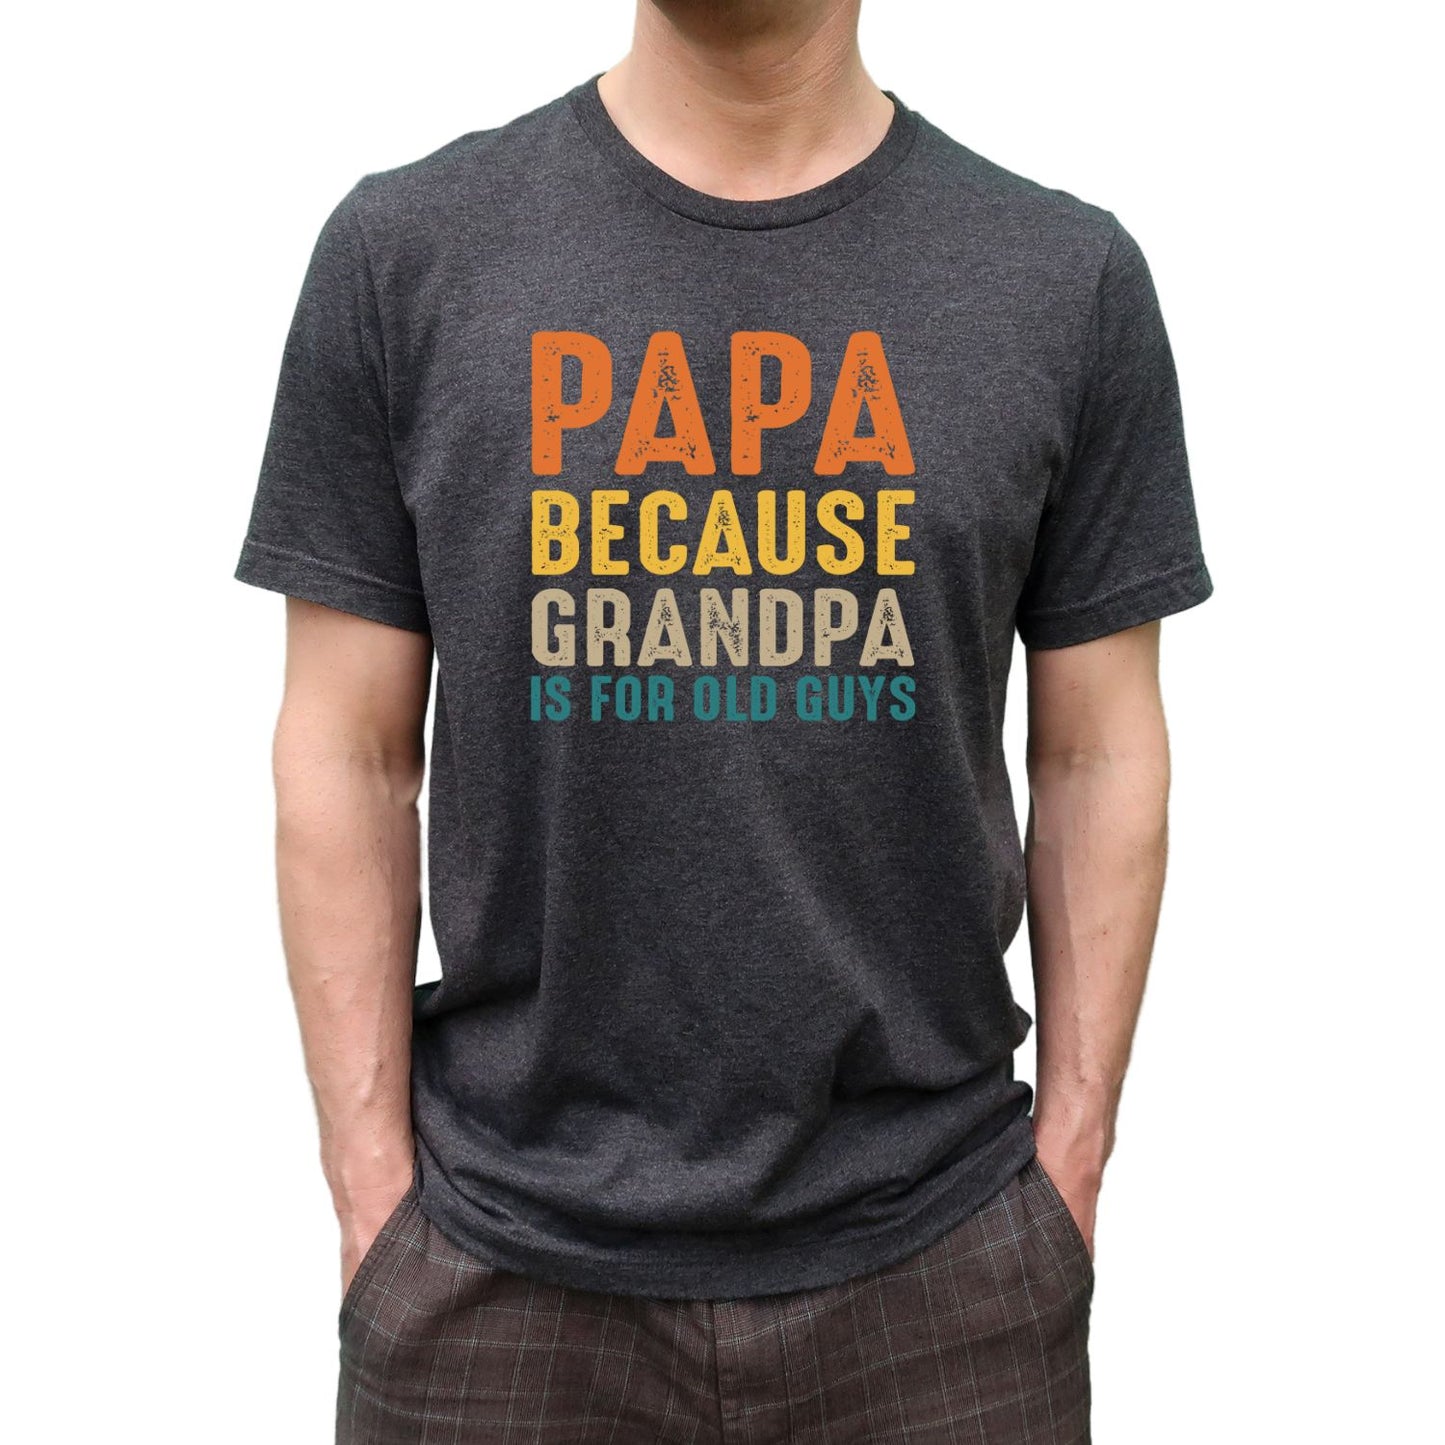 Papa Because Grandpa is For Old Guys